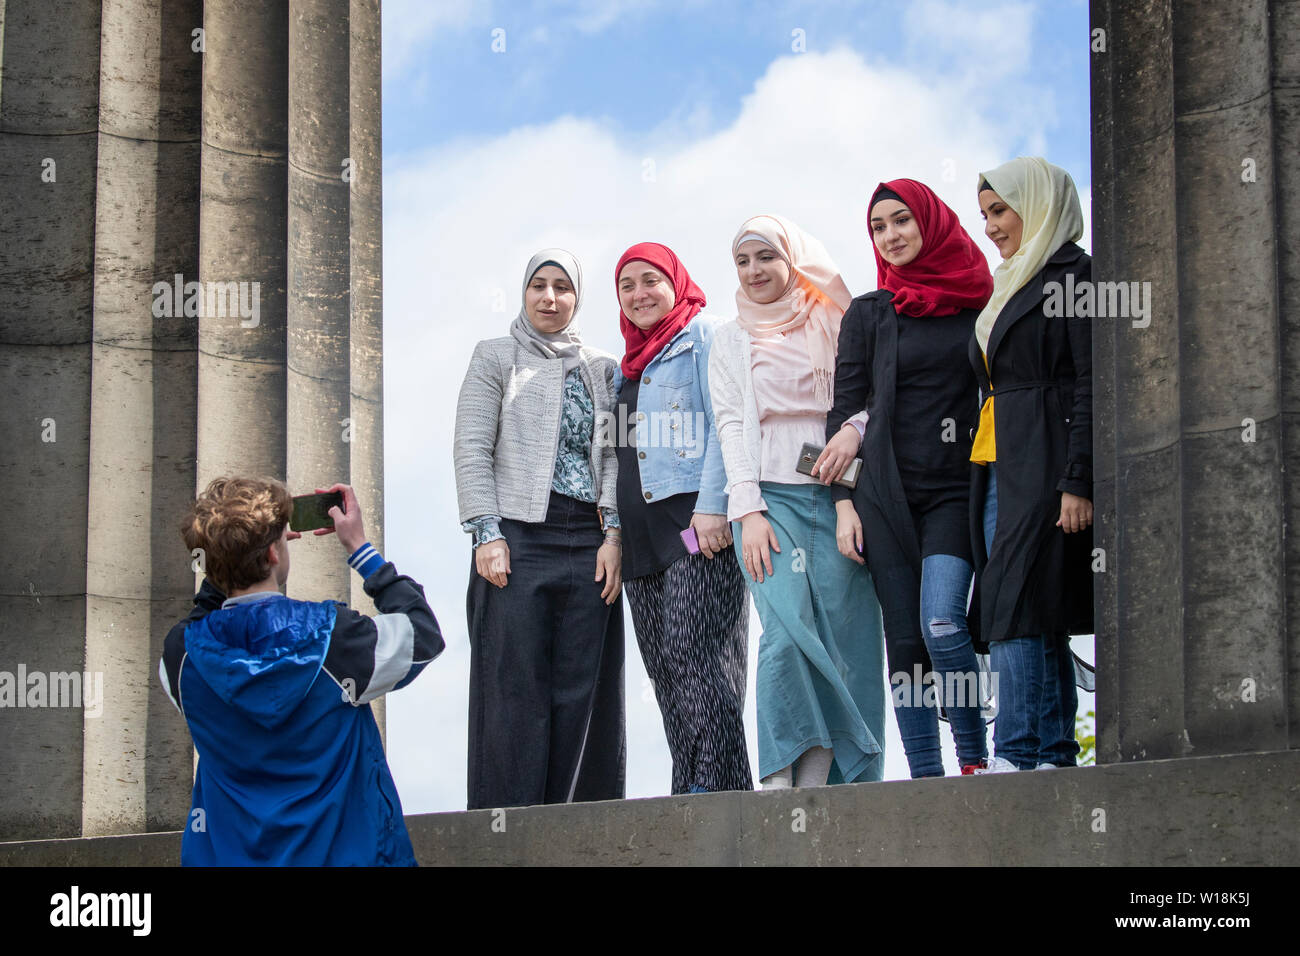 Some of the Syrian refugees, living in Glasgow, during a photocall, on Edinburgh's Calton Hill, for a theatrical adaptation of Euripides' The Trojan Women which they have written and hope to perform at this year's Edinburgh Festival. Stock Photo